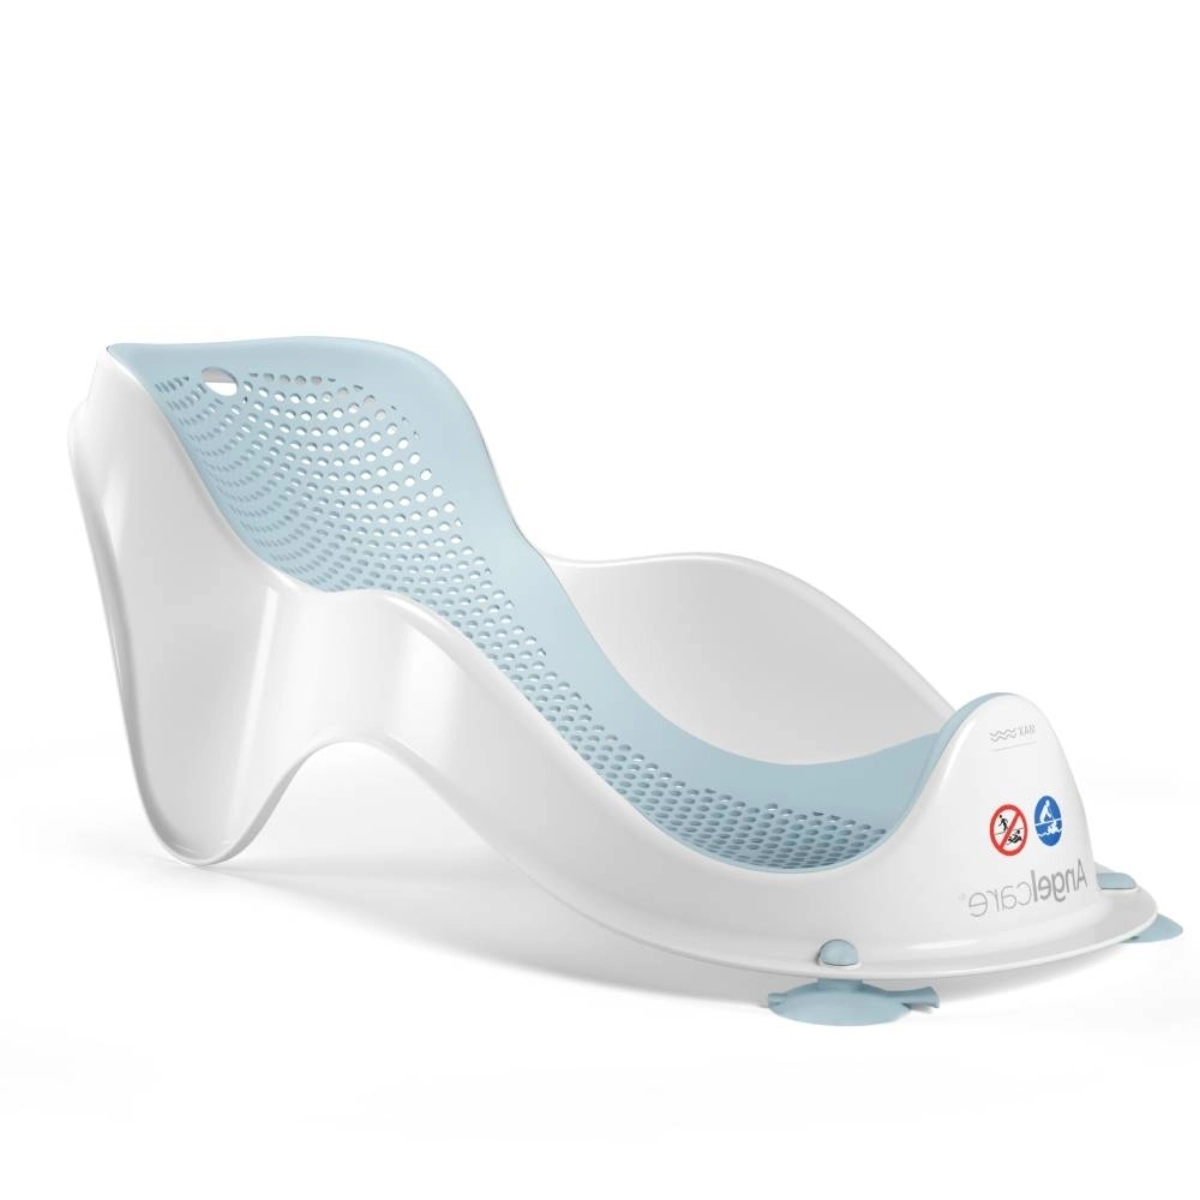 Image of Angelcare Soft Touch Mini Baby Bath Support-Blue/Aqua (2021)